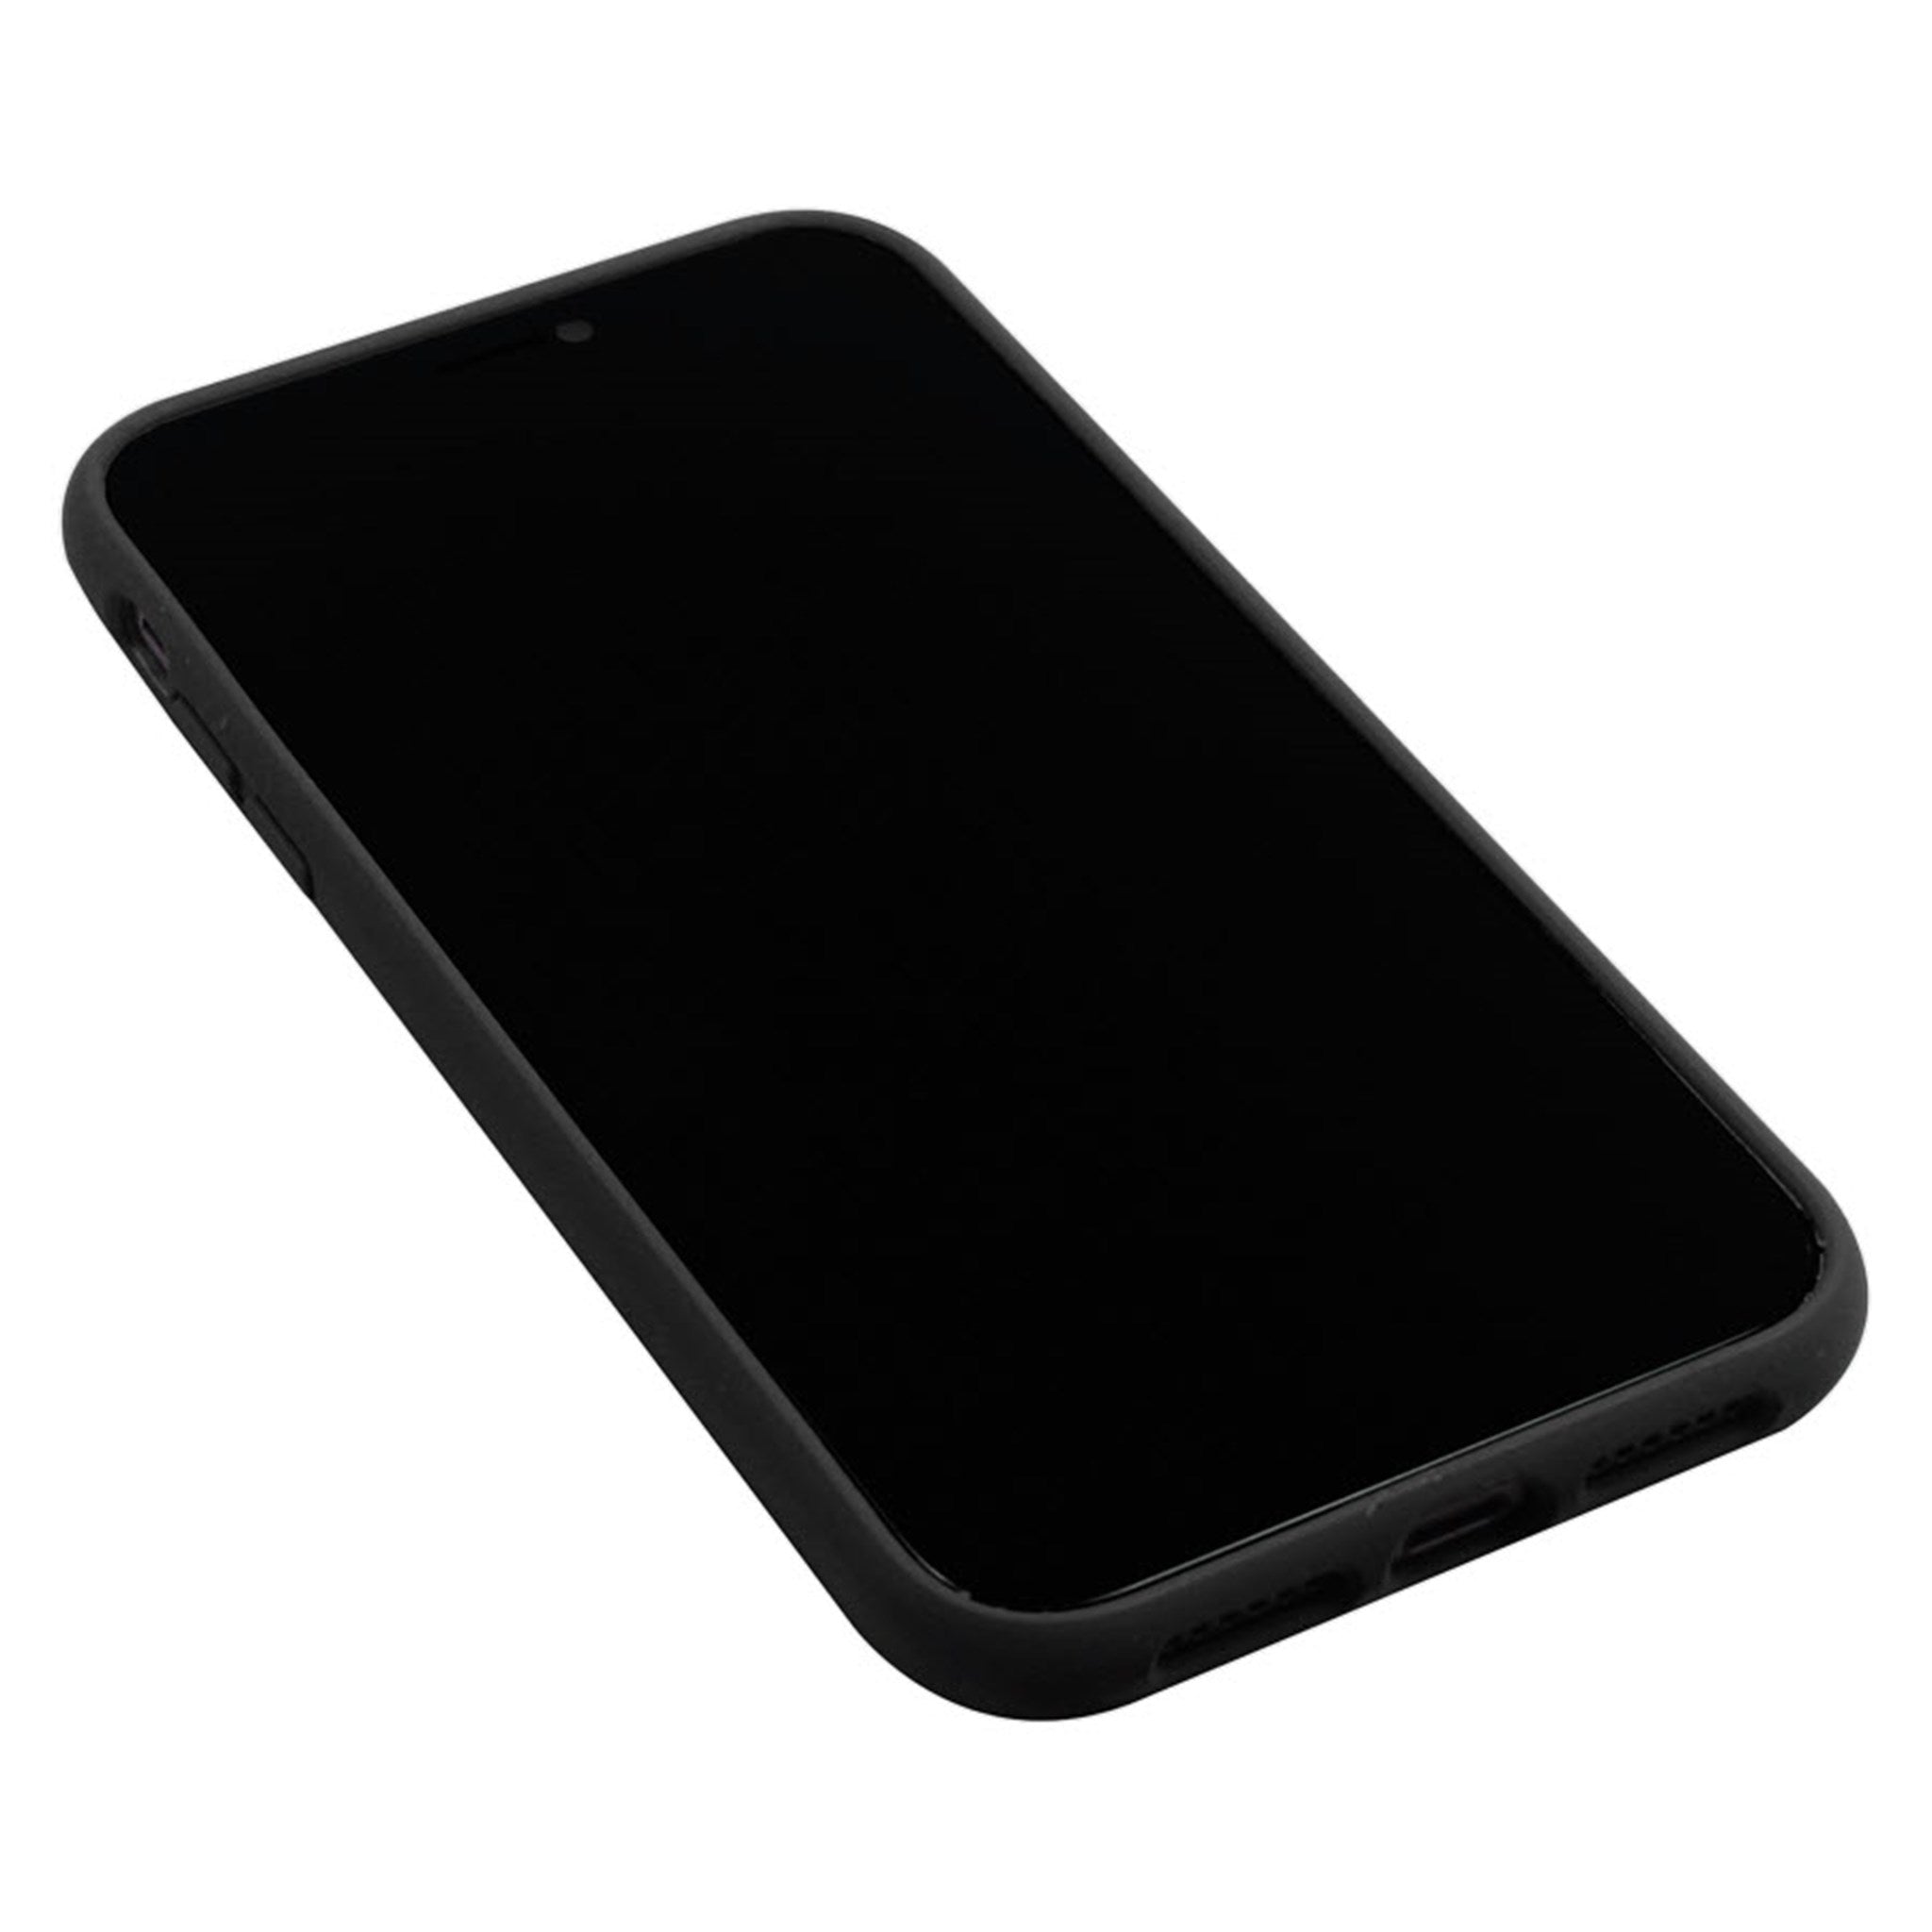 COIPXXS06_GreyLime_iPhone_X_XS_Biodegradable_Cover_Black_05.jpg